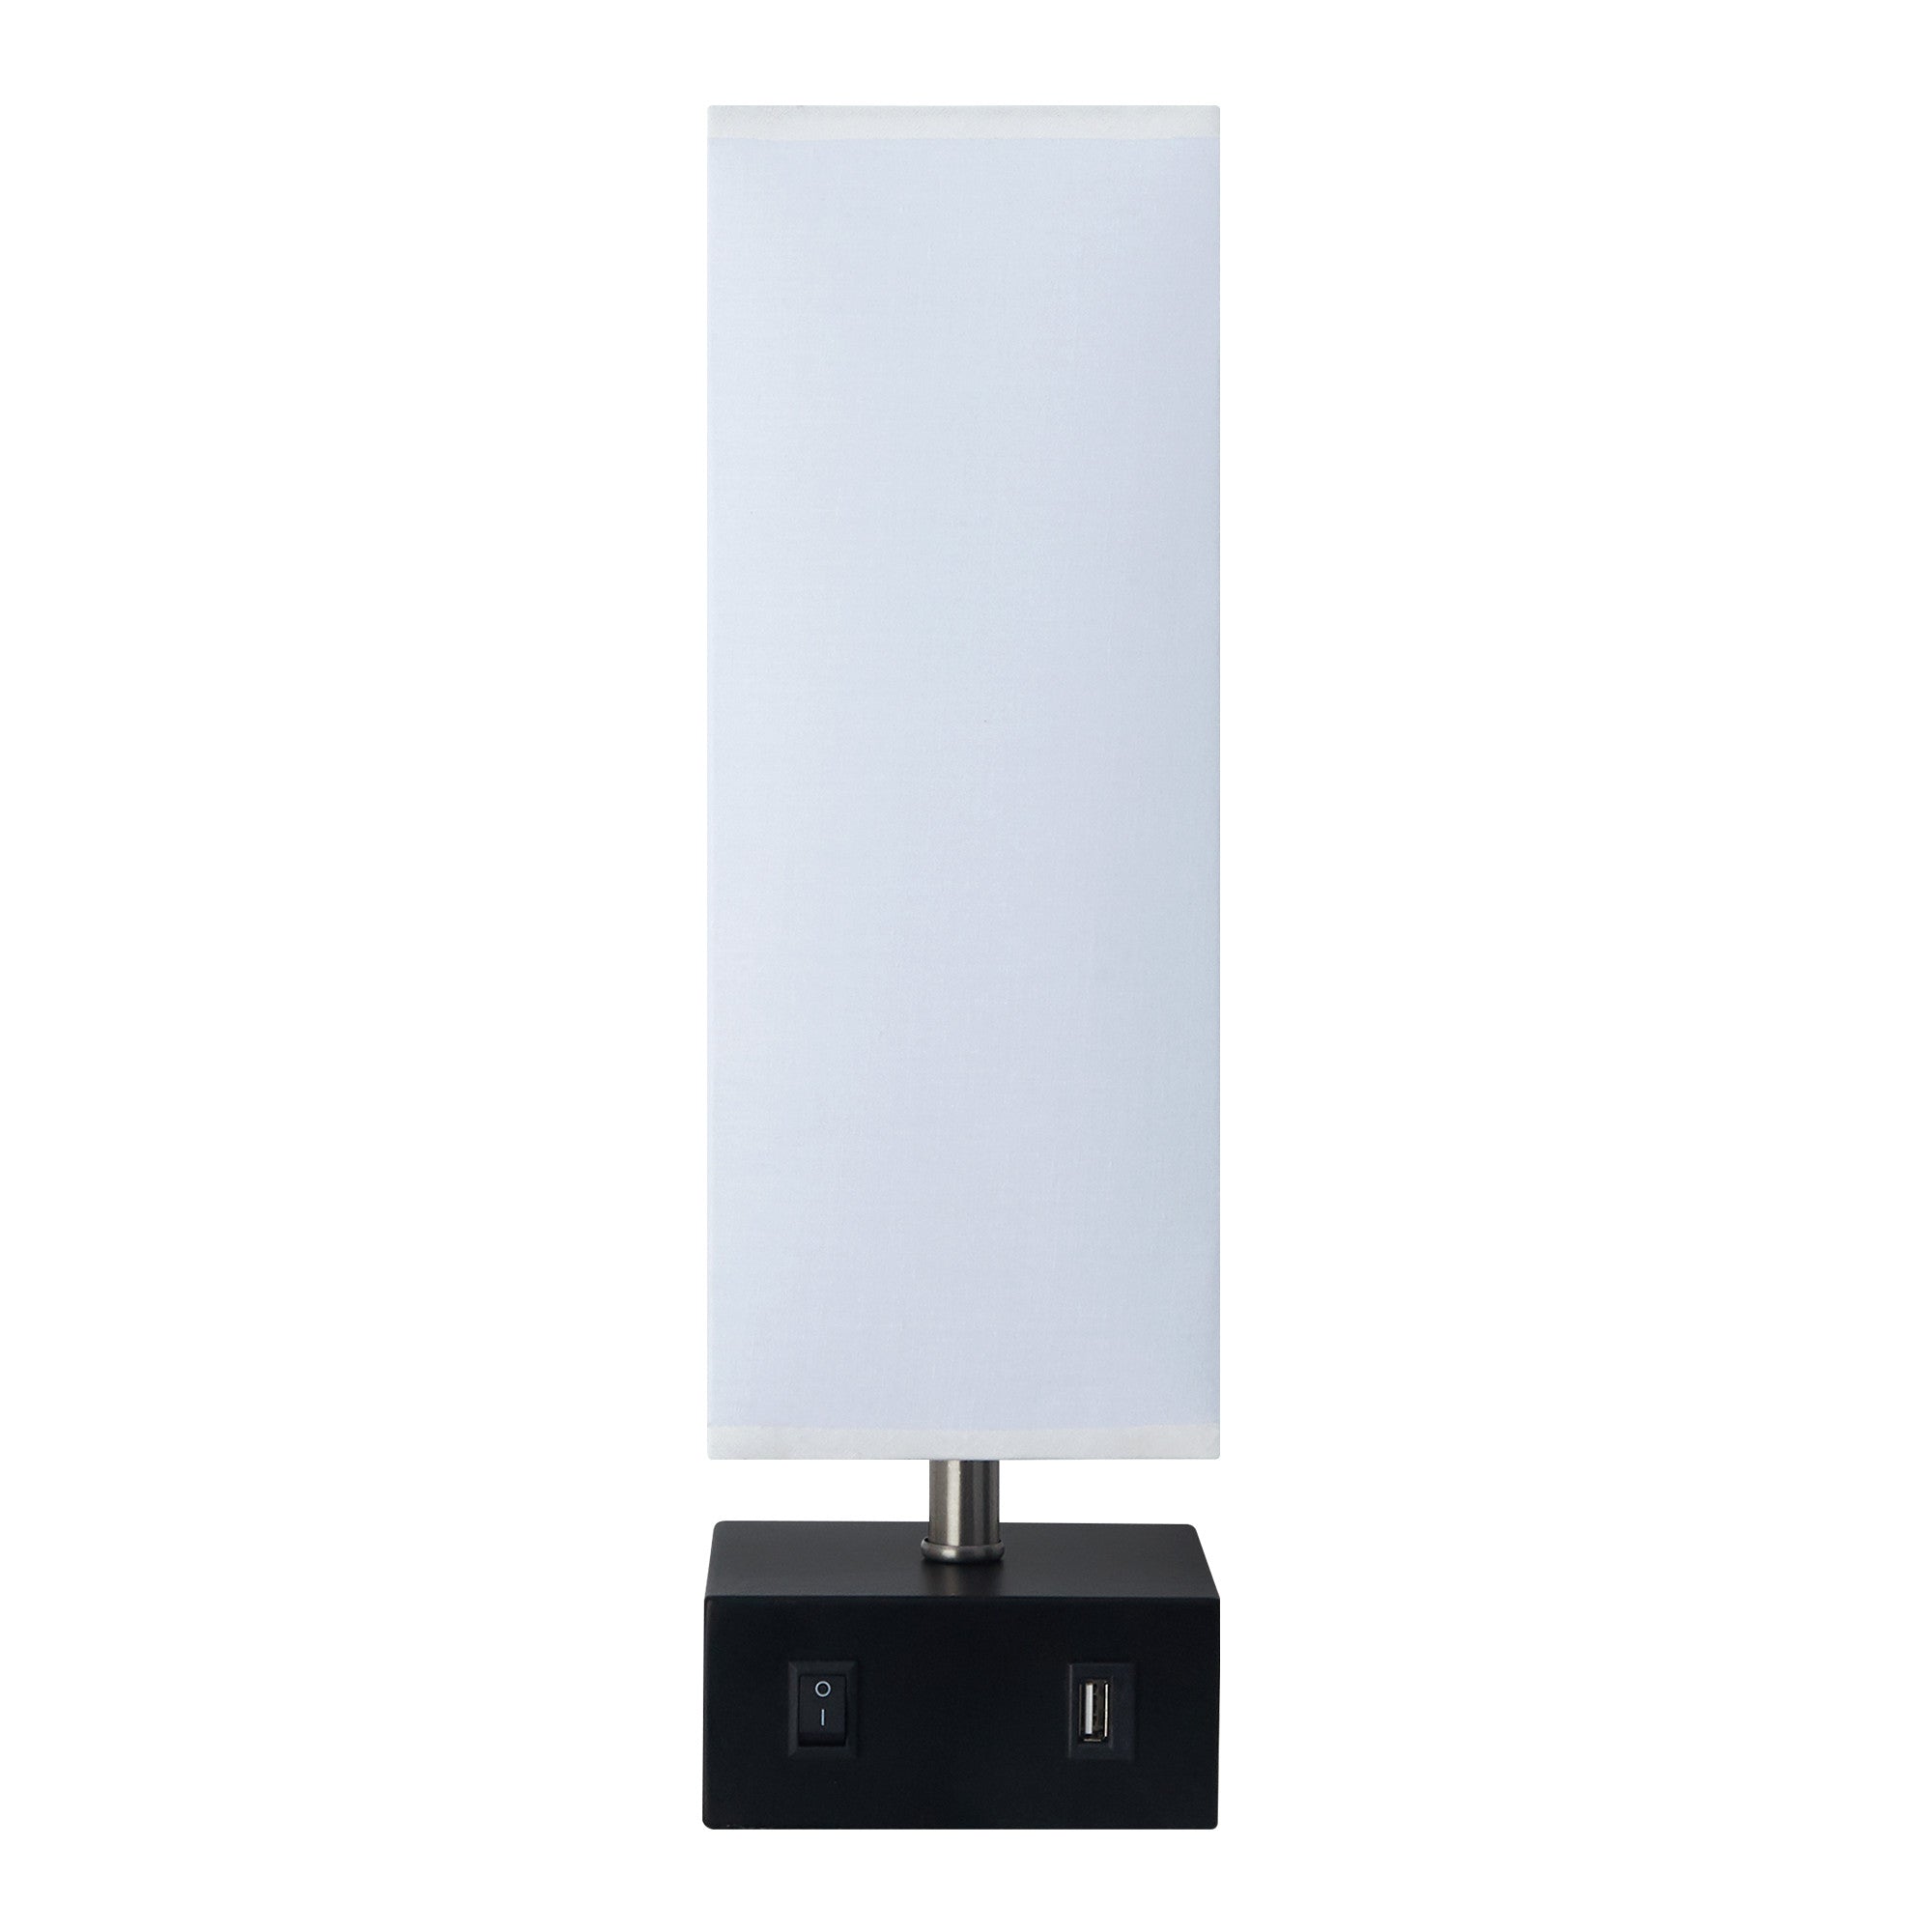 Teamson Home Colette 14.5" Modern Metal Table Lamp with Square Shade and USB Port, Black/White